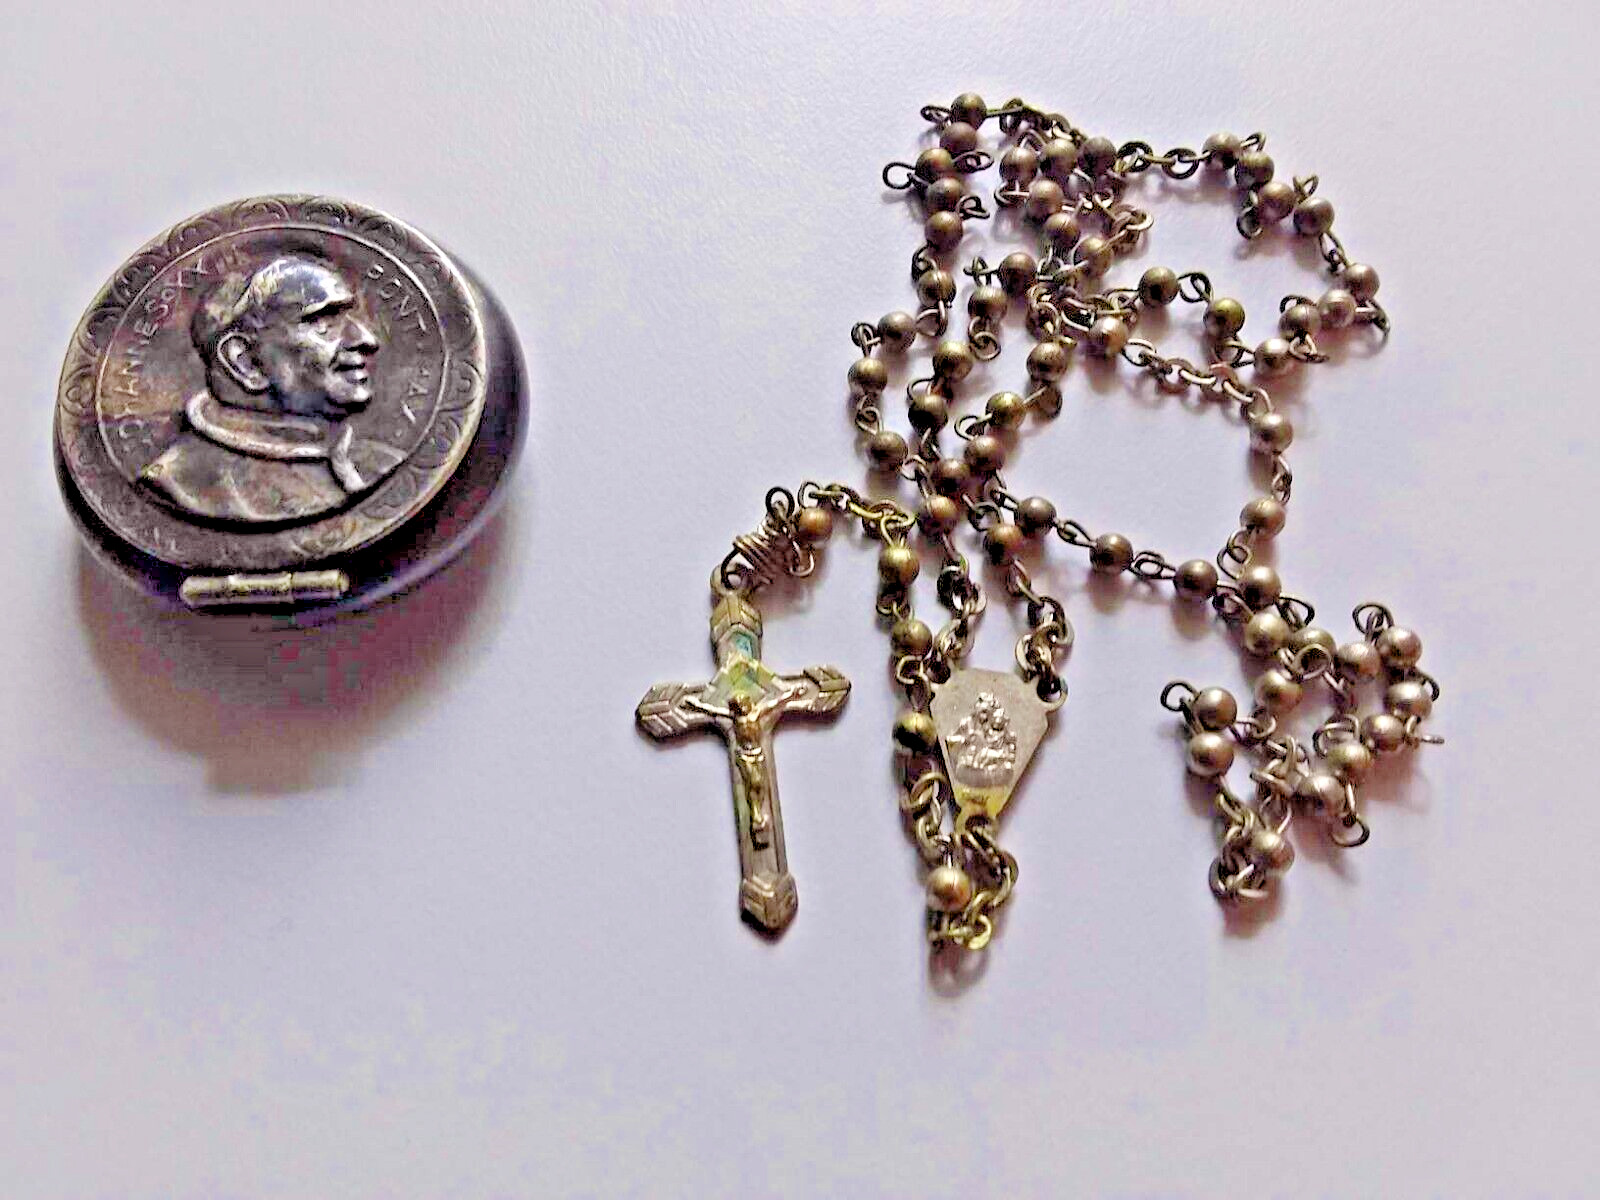 POPE JOHN XXIII GIVEN BLESSED VATICAN GIFT ROSARY 1960s UNIQUE RARE